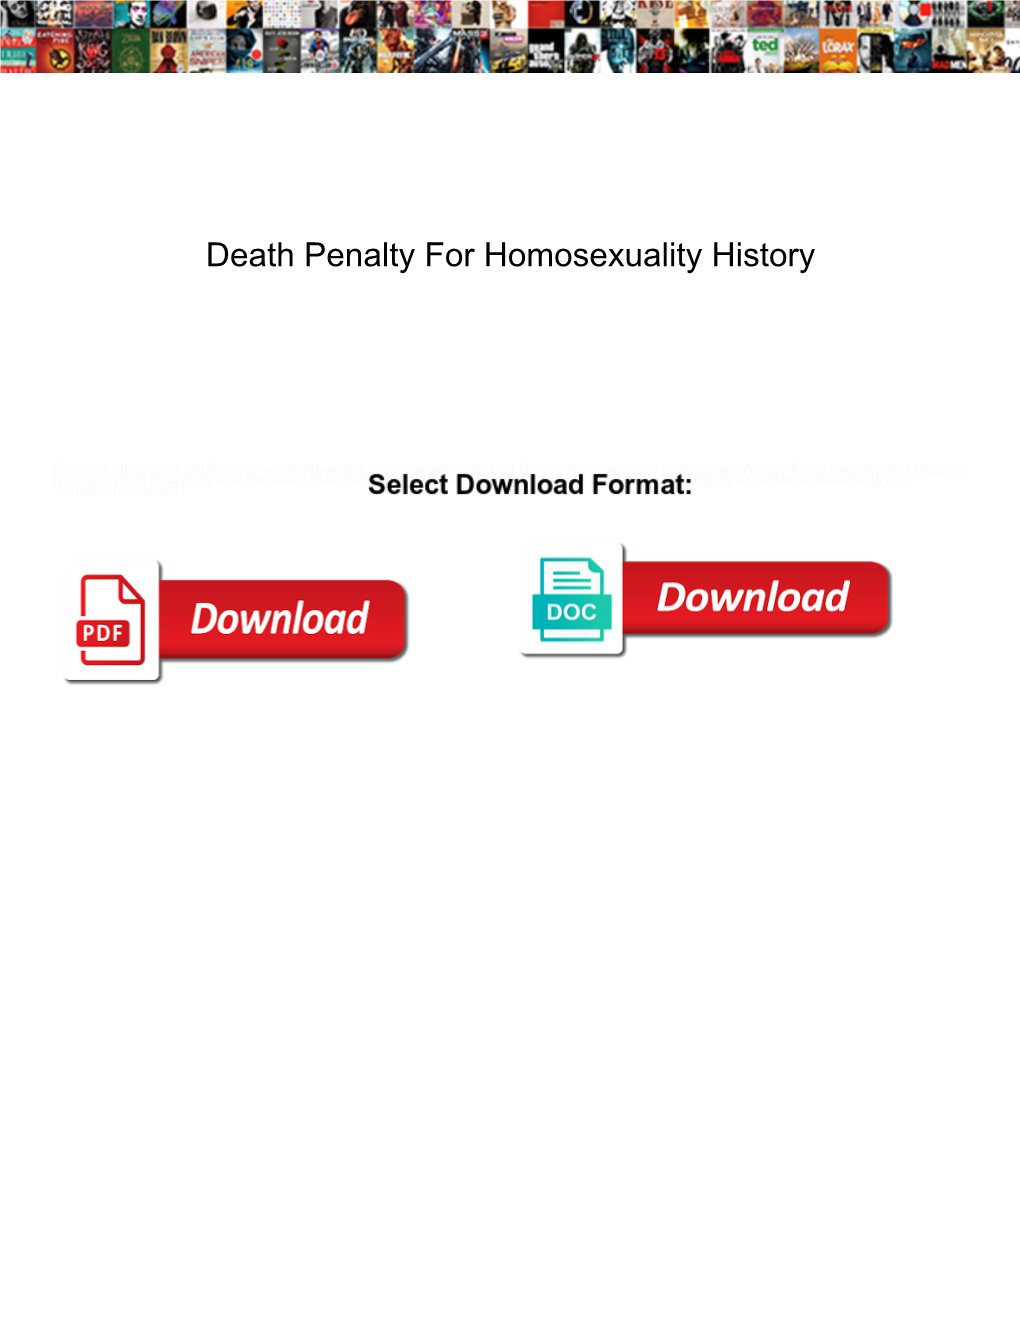 Death Penalty for Homosexuality History